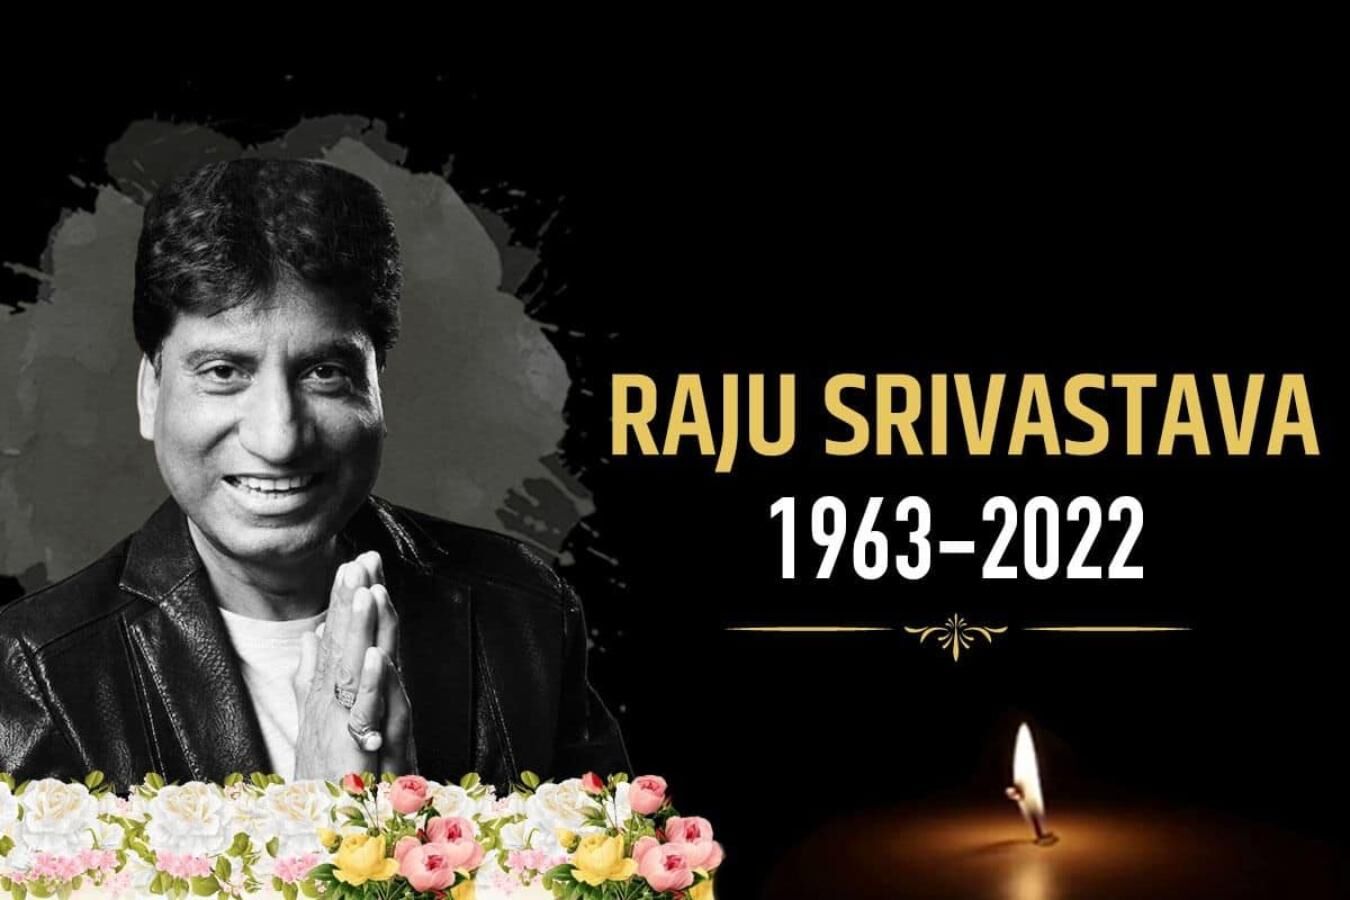 RIP Raju Srivastava: From driving an auto to getting ₹50 for comedy.. Life was full of struggles